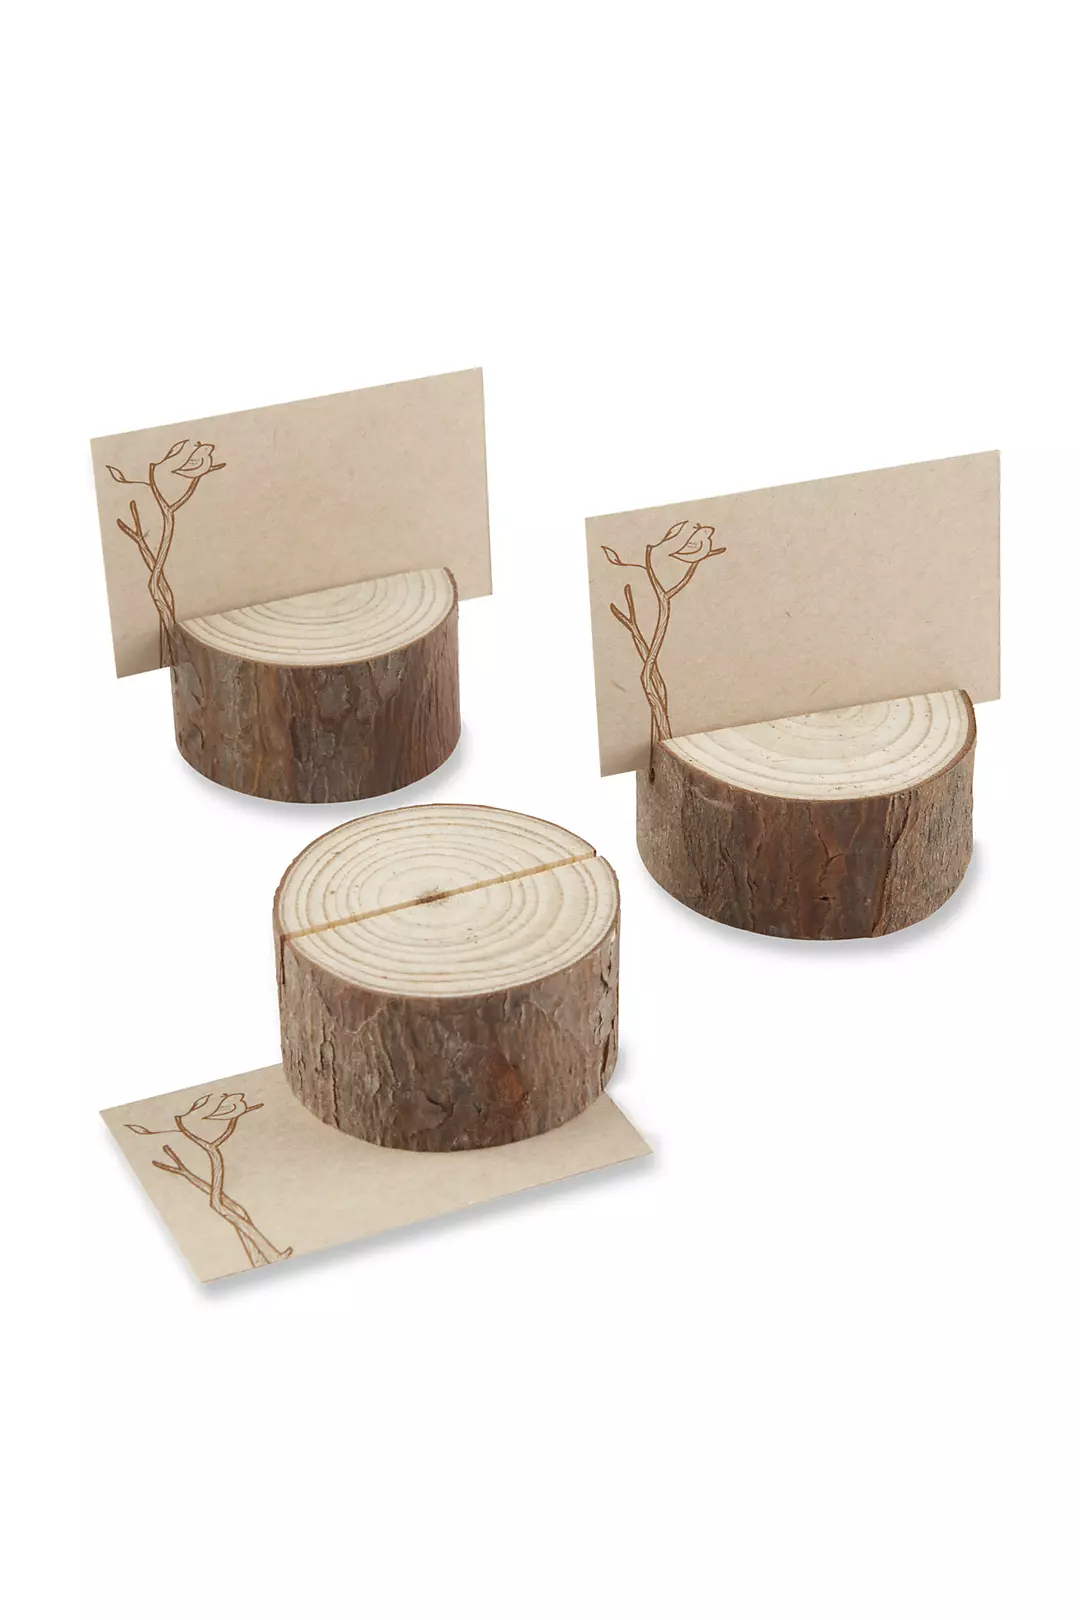 Rustic Wood Place Card Holder Set of 4 Image